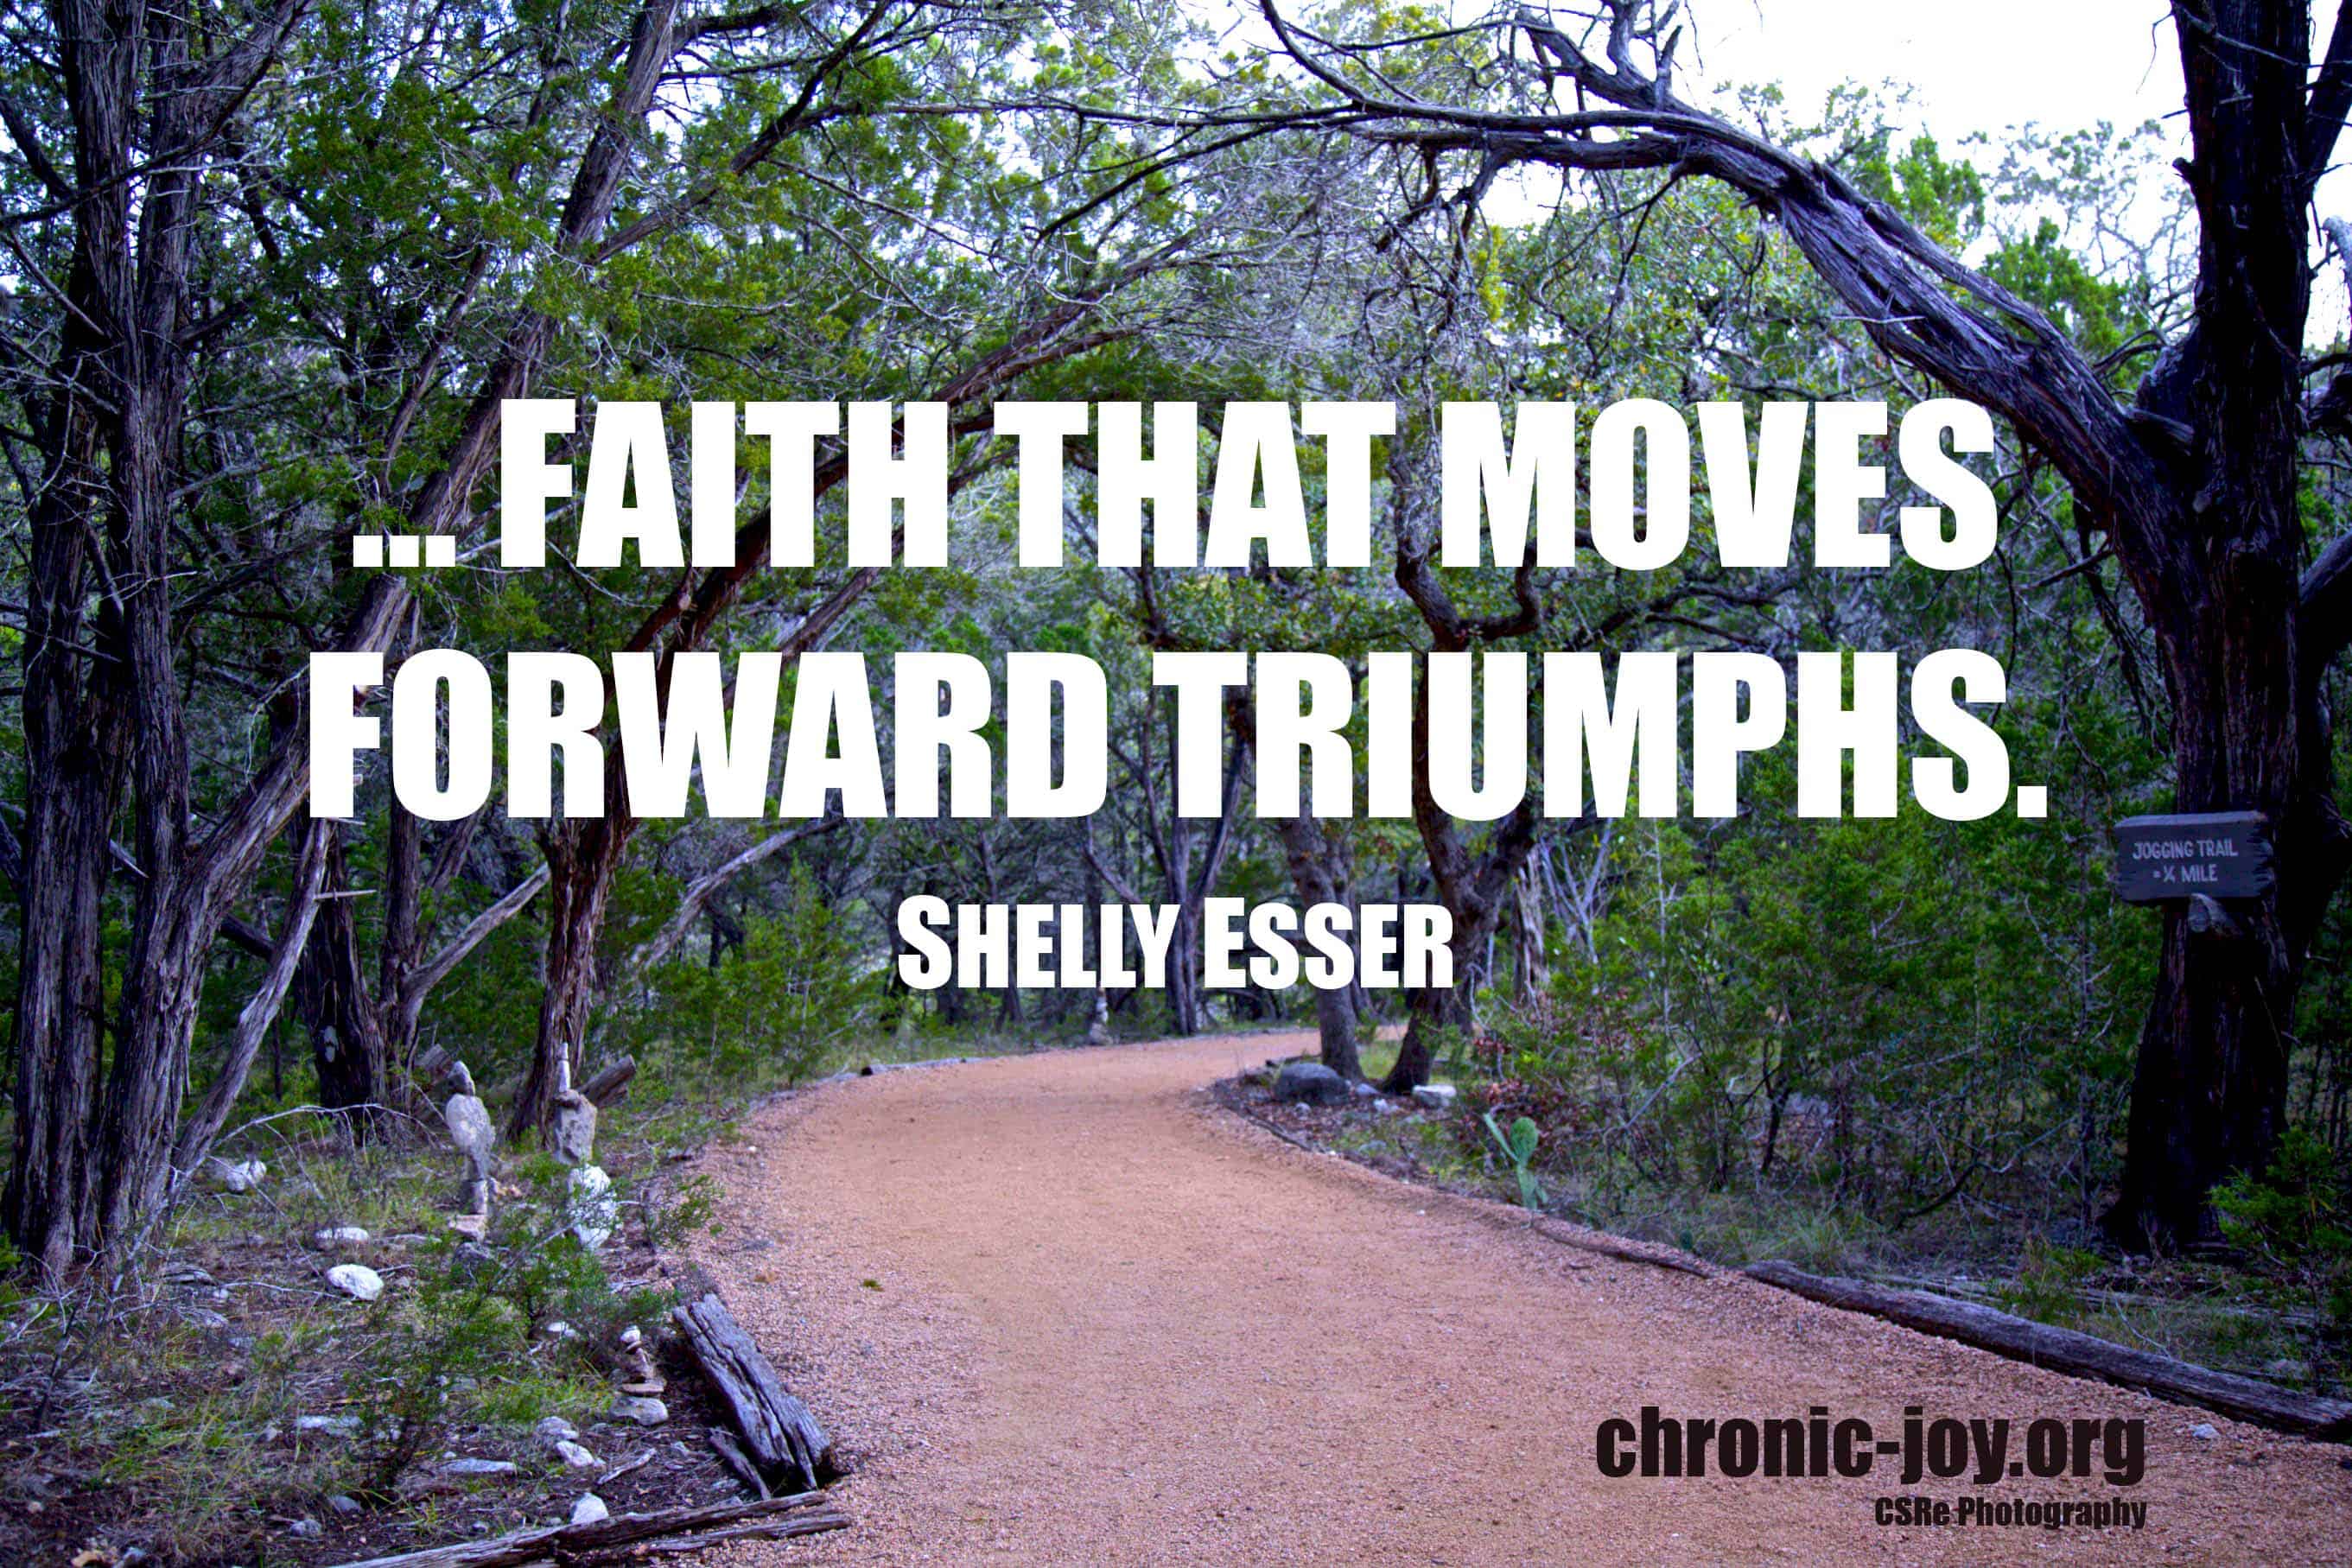 Living Unoffended Even When Healing Doesn't Come • "...faith that moves forward triumphs." Shelly Esser